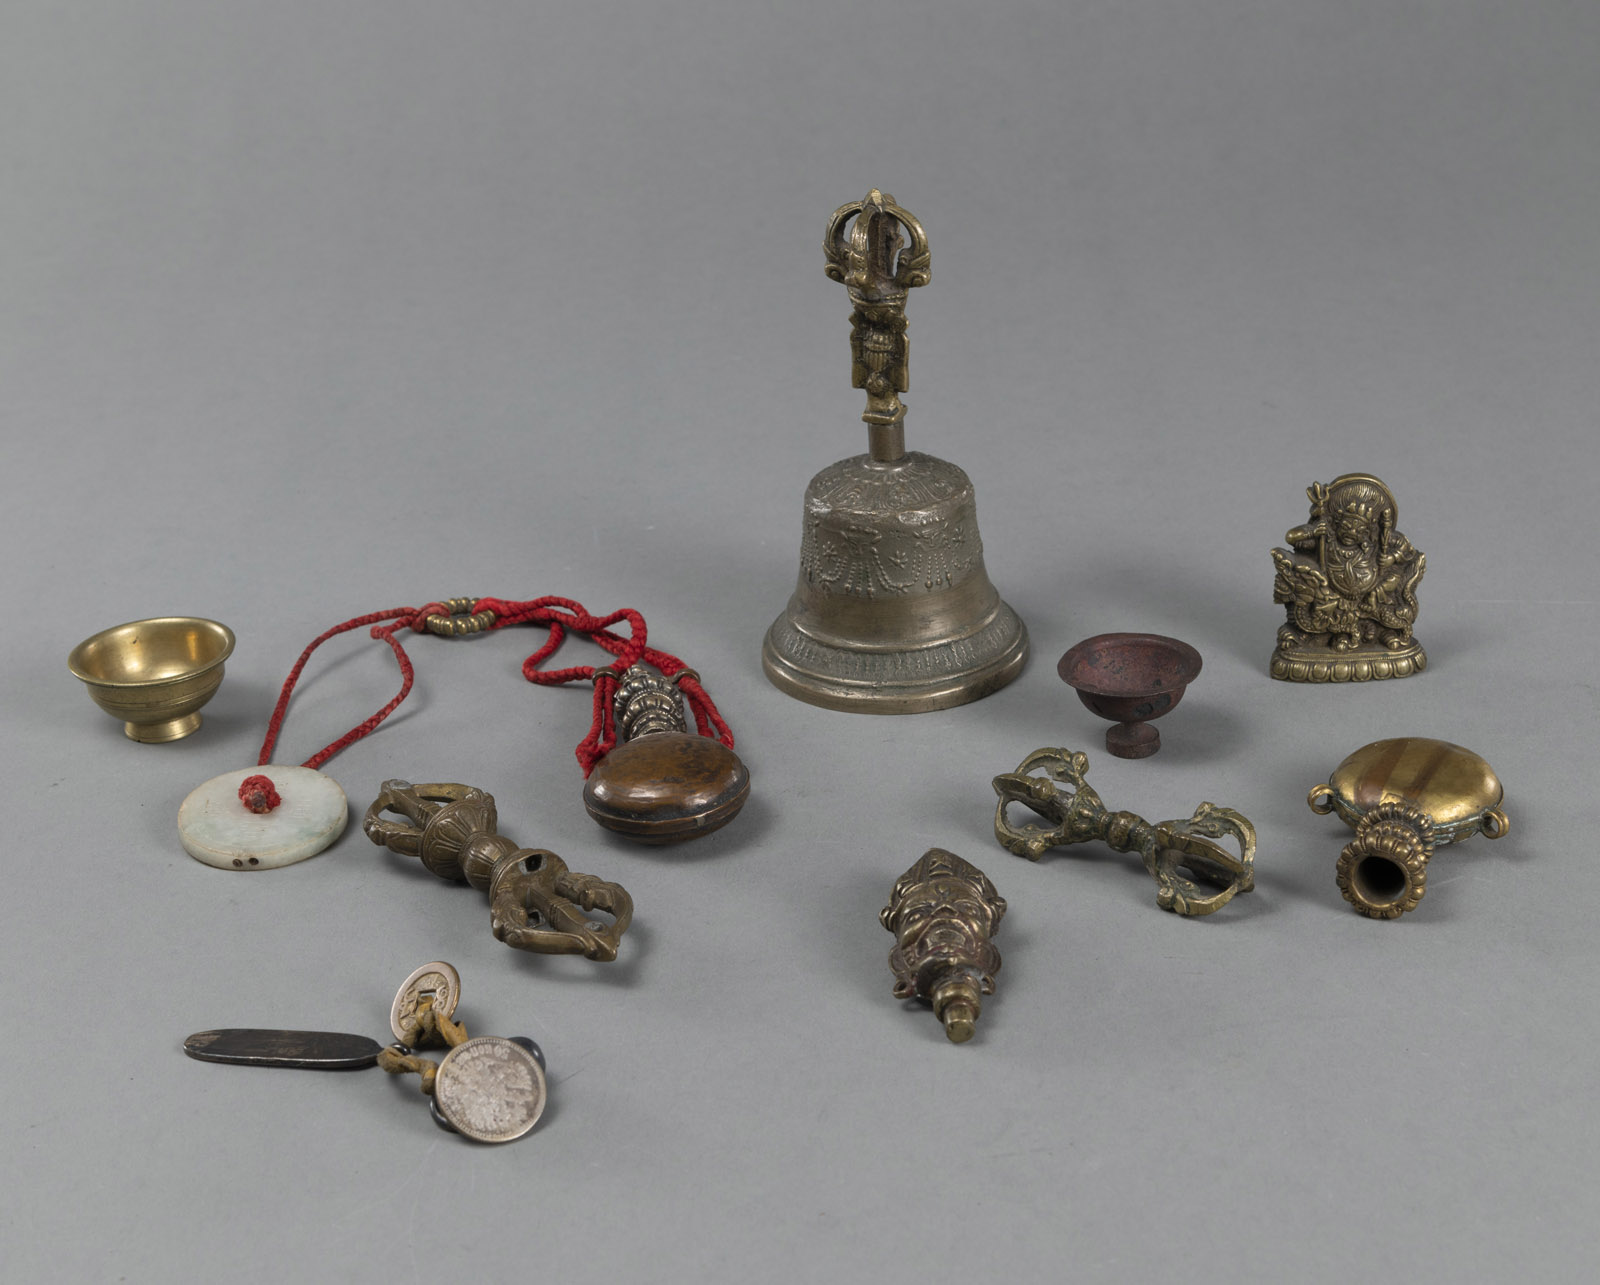 <b>A GHANTA, TWO VAJRAS, A BUDDHIST BRONZE RELIEF, AND PENDANTS</b>